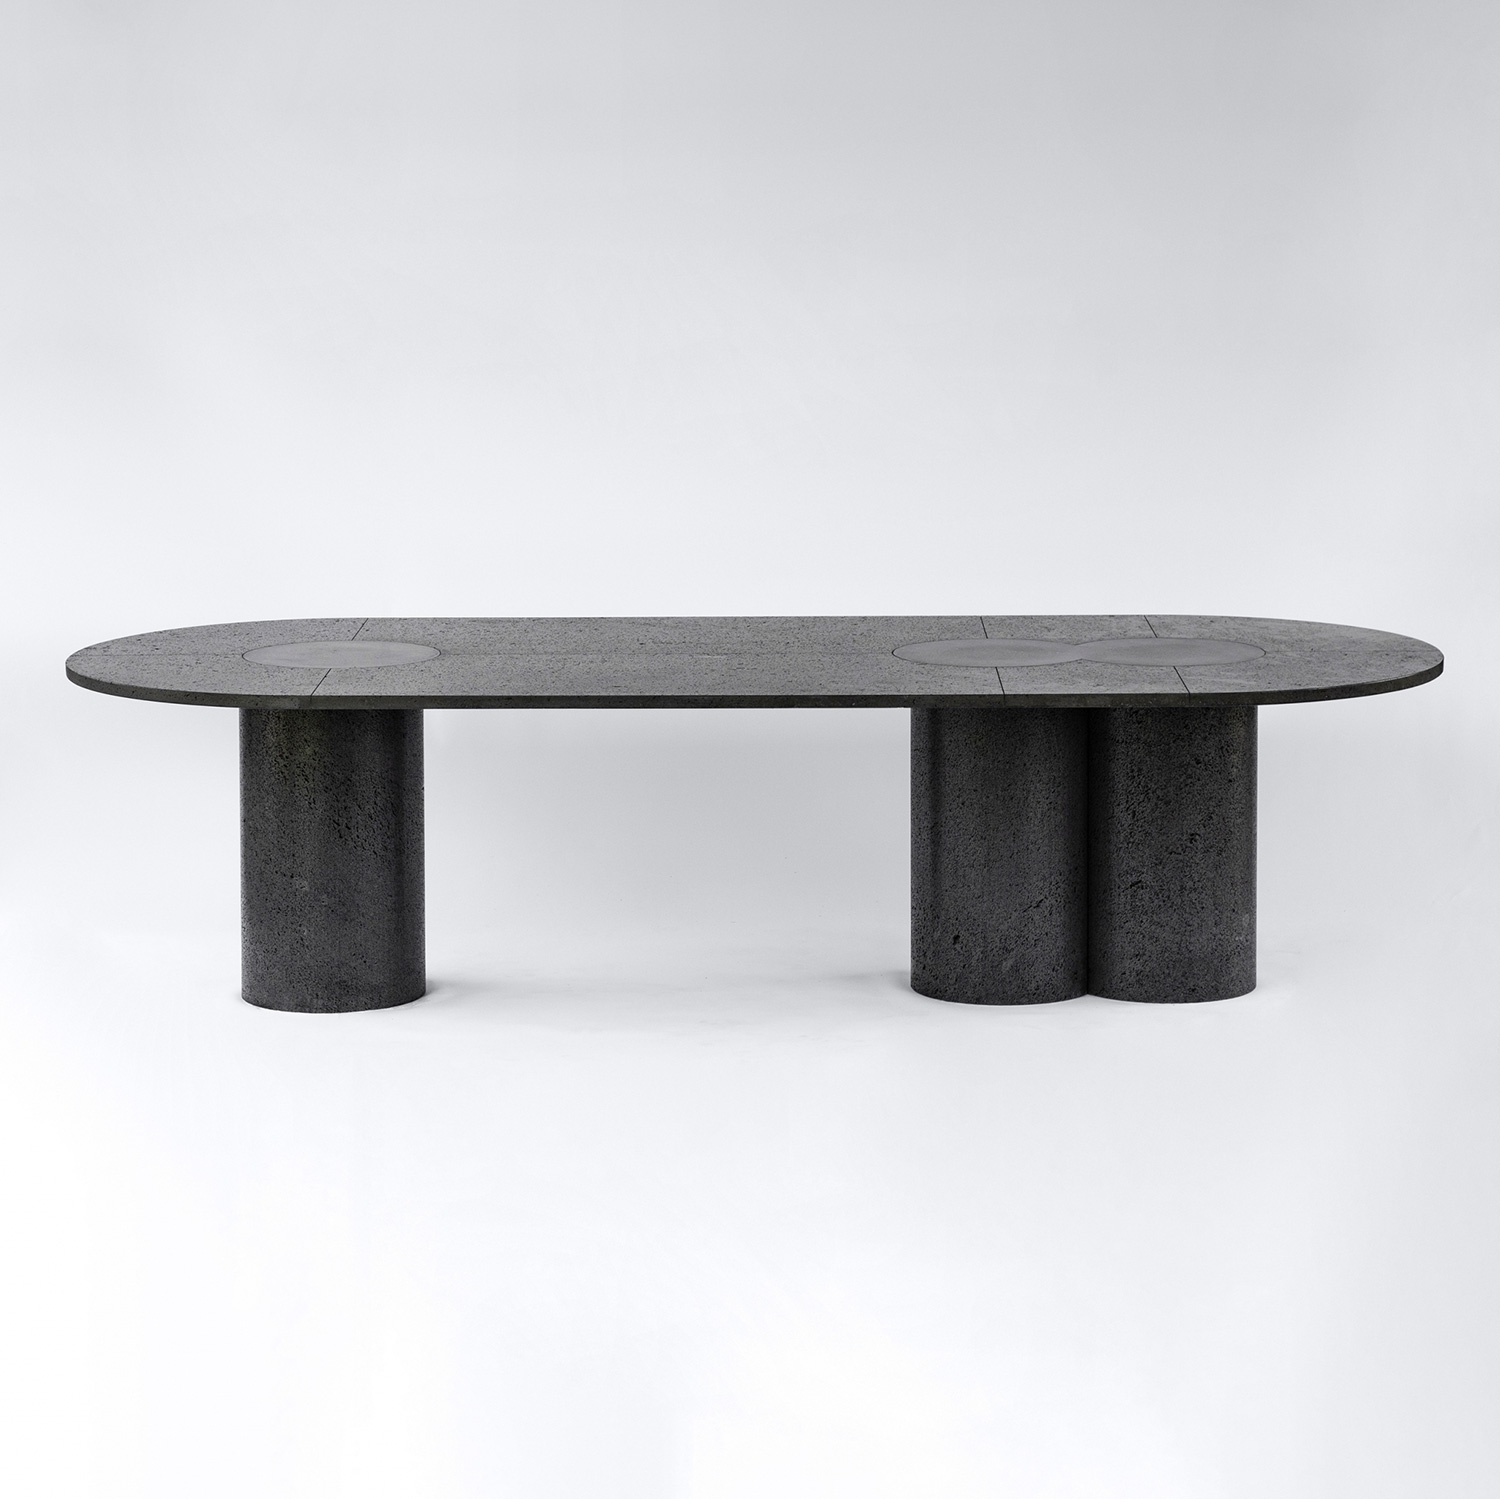 Petra table is made out of volcanic rock